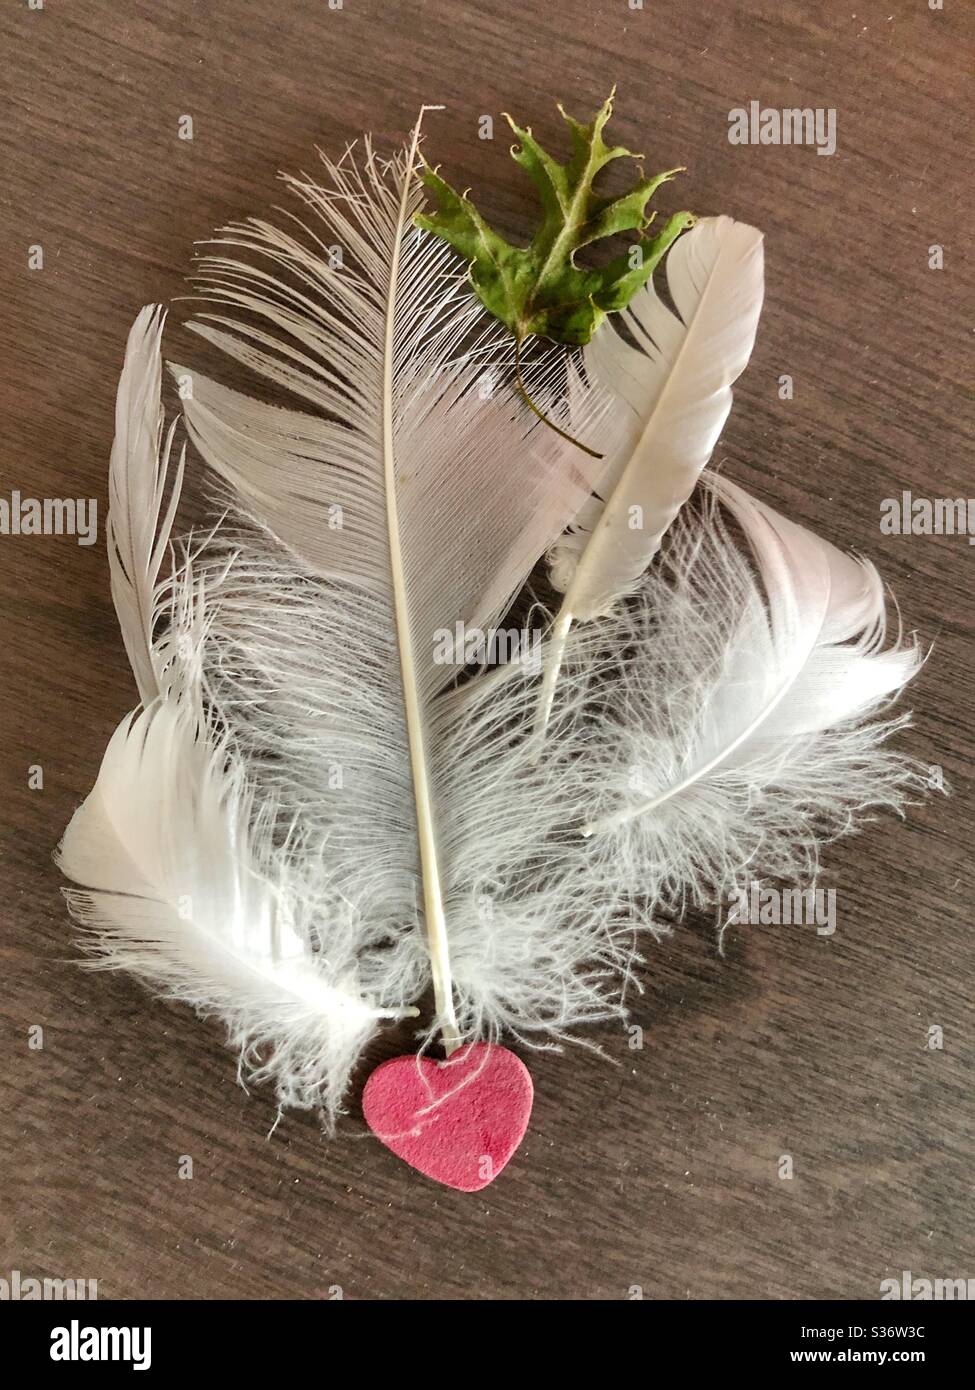 A display of white feathers. Stock Photo